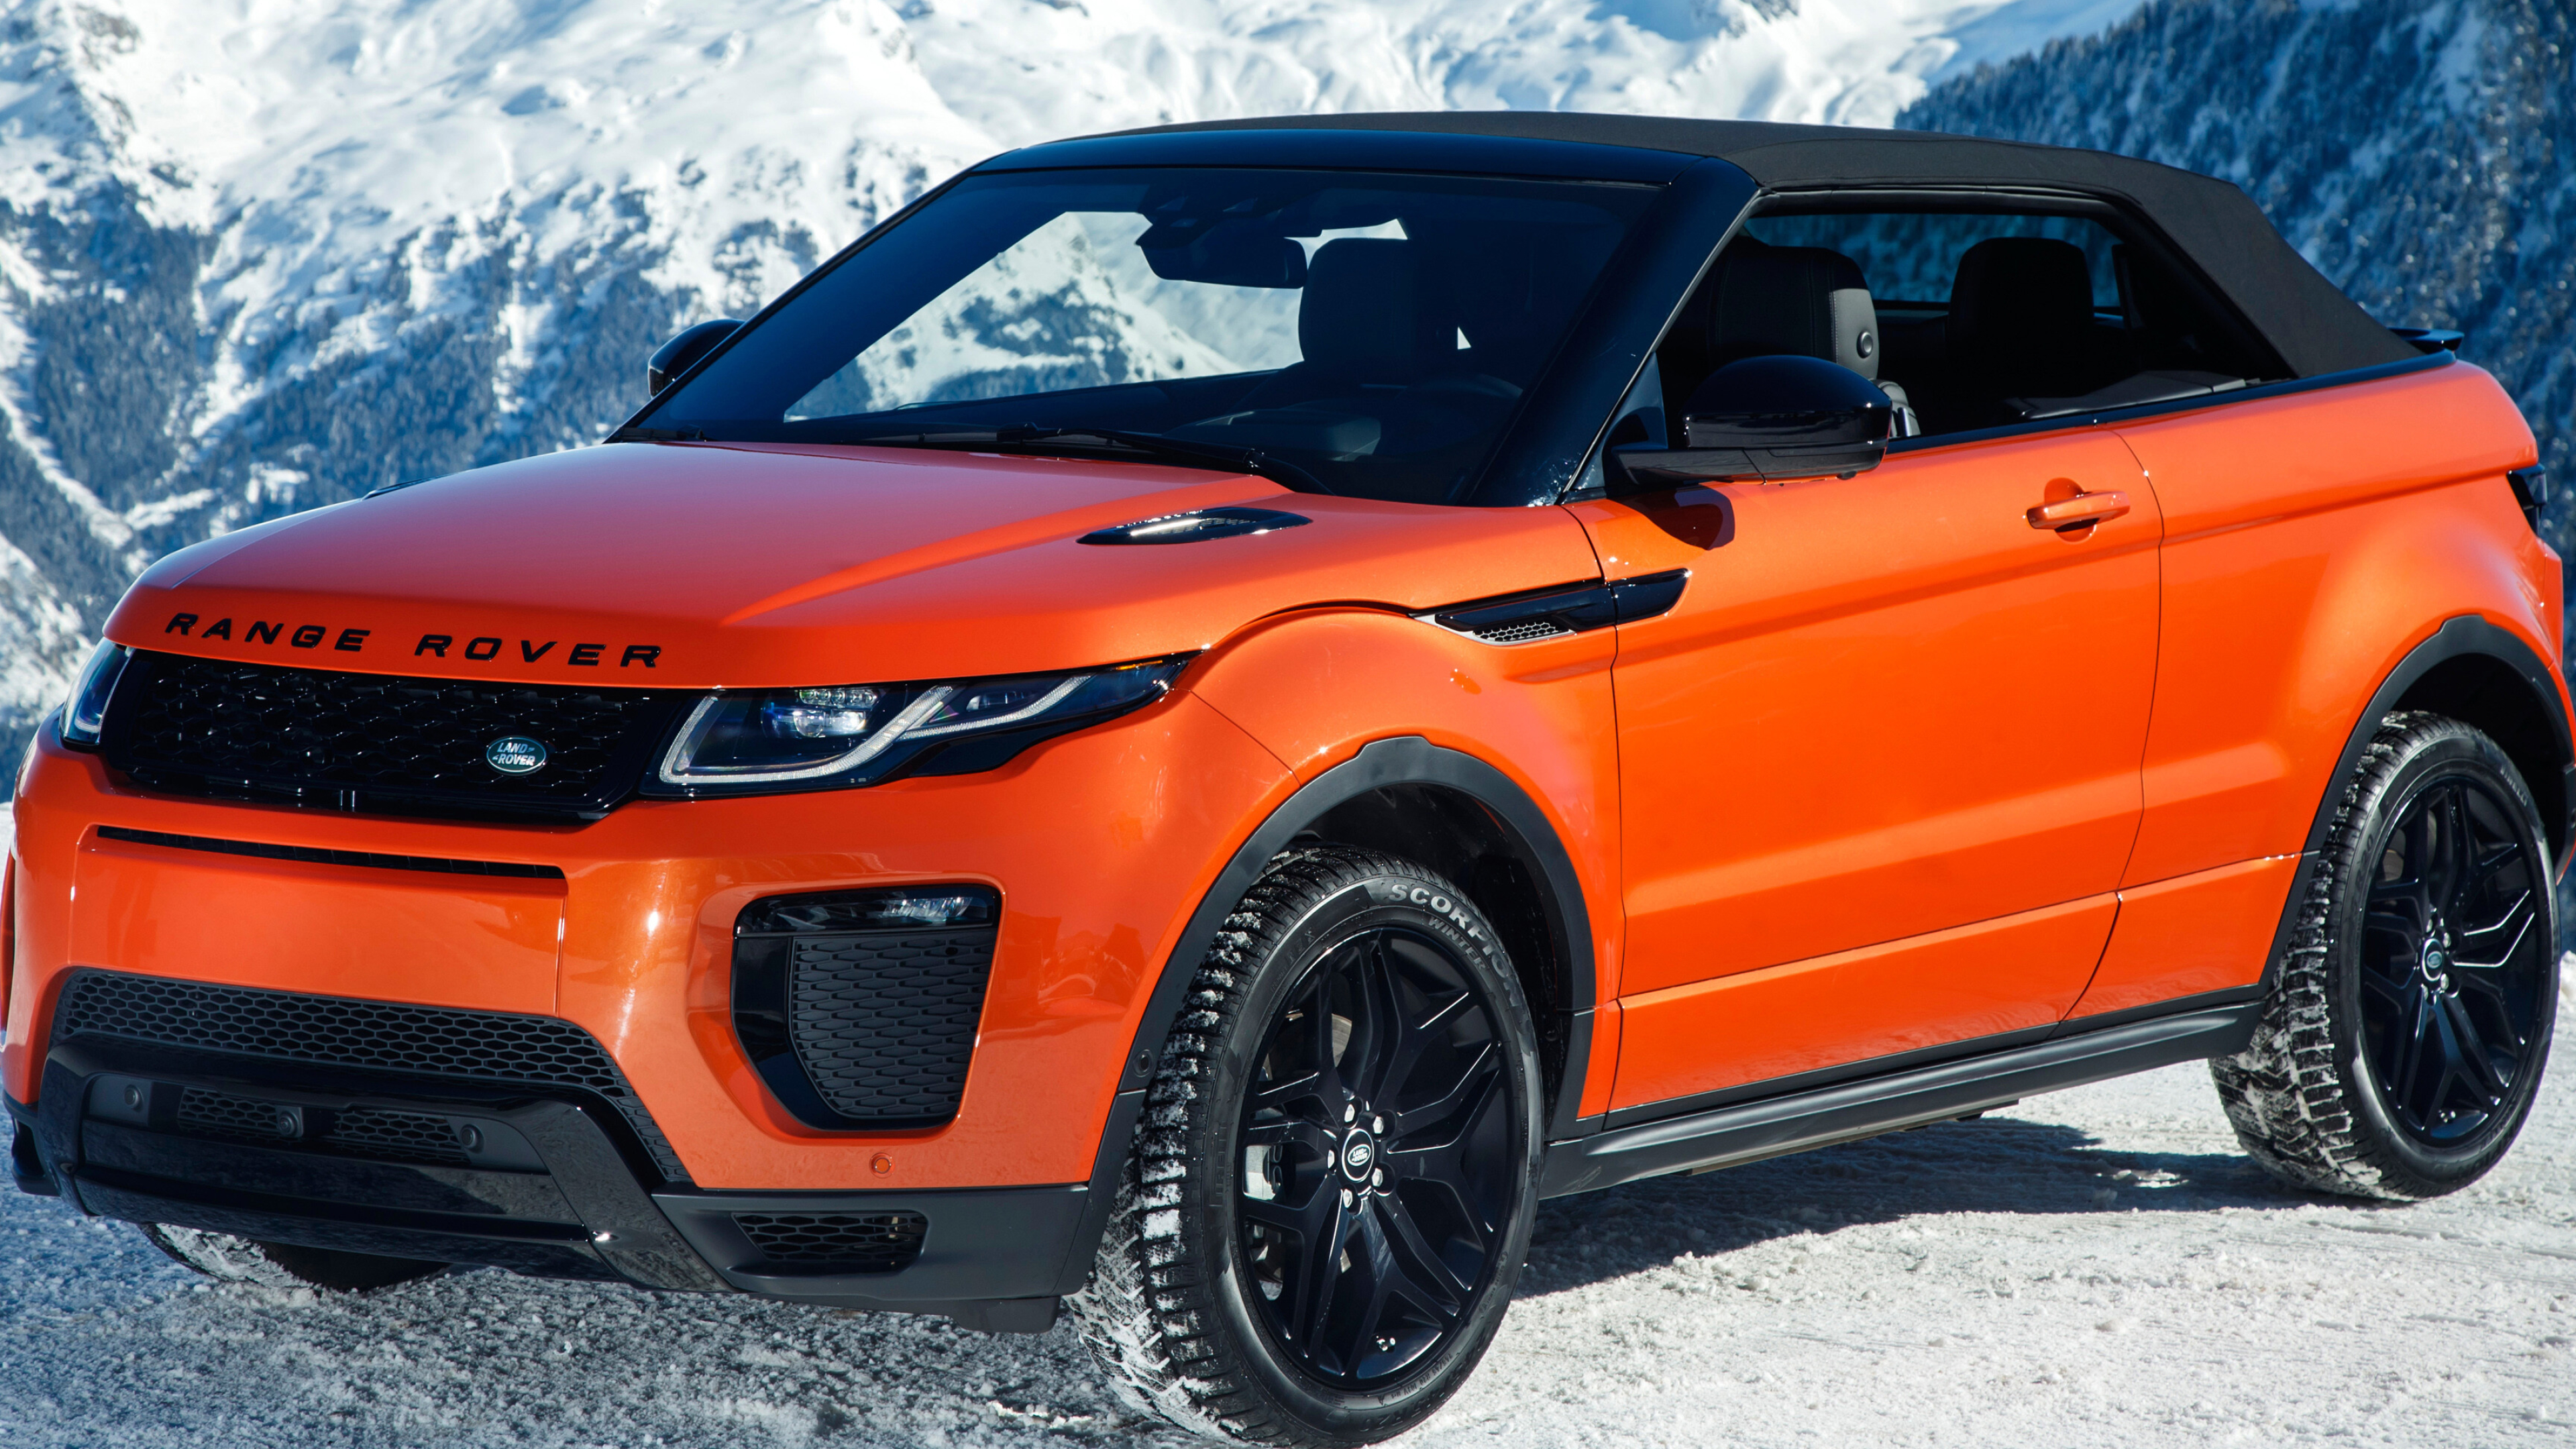 Range Rover: Evoque Convertible, The British car marque, launched in 1970. 3840x2160 4K Background.